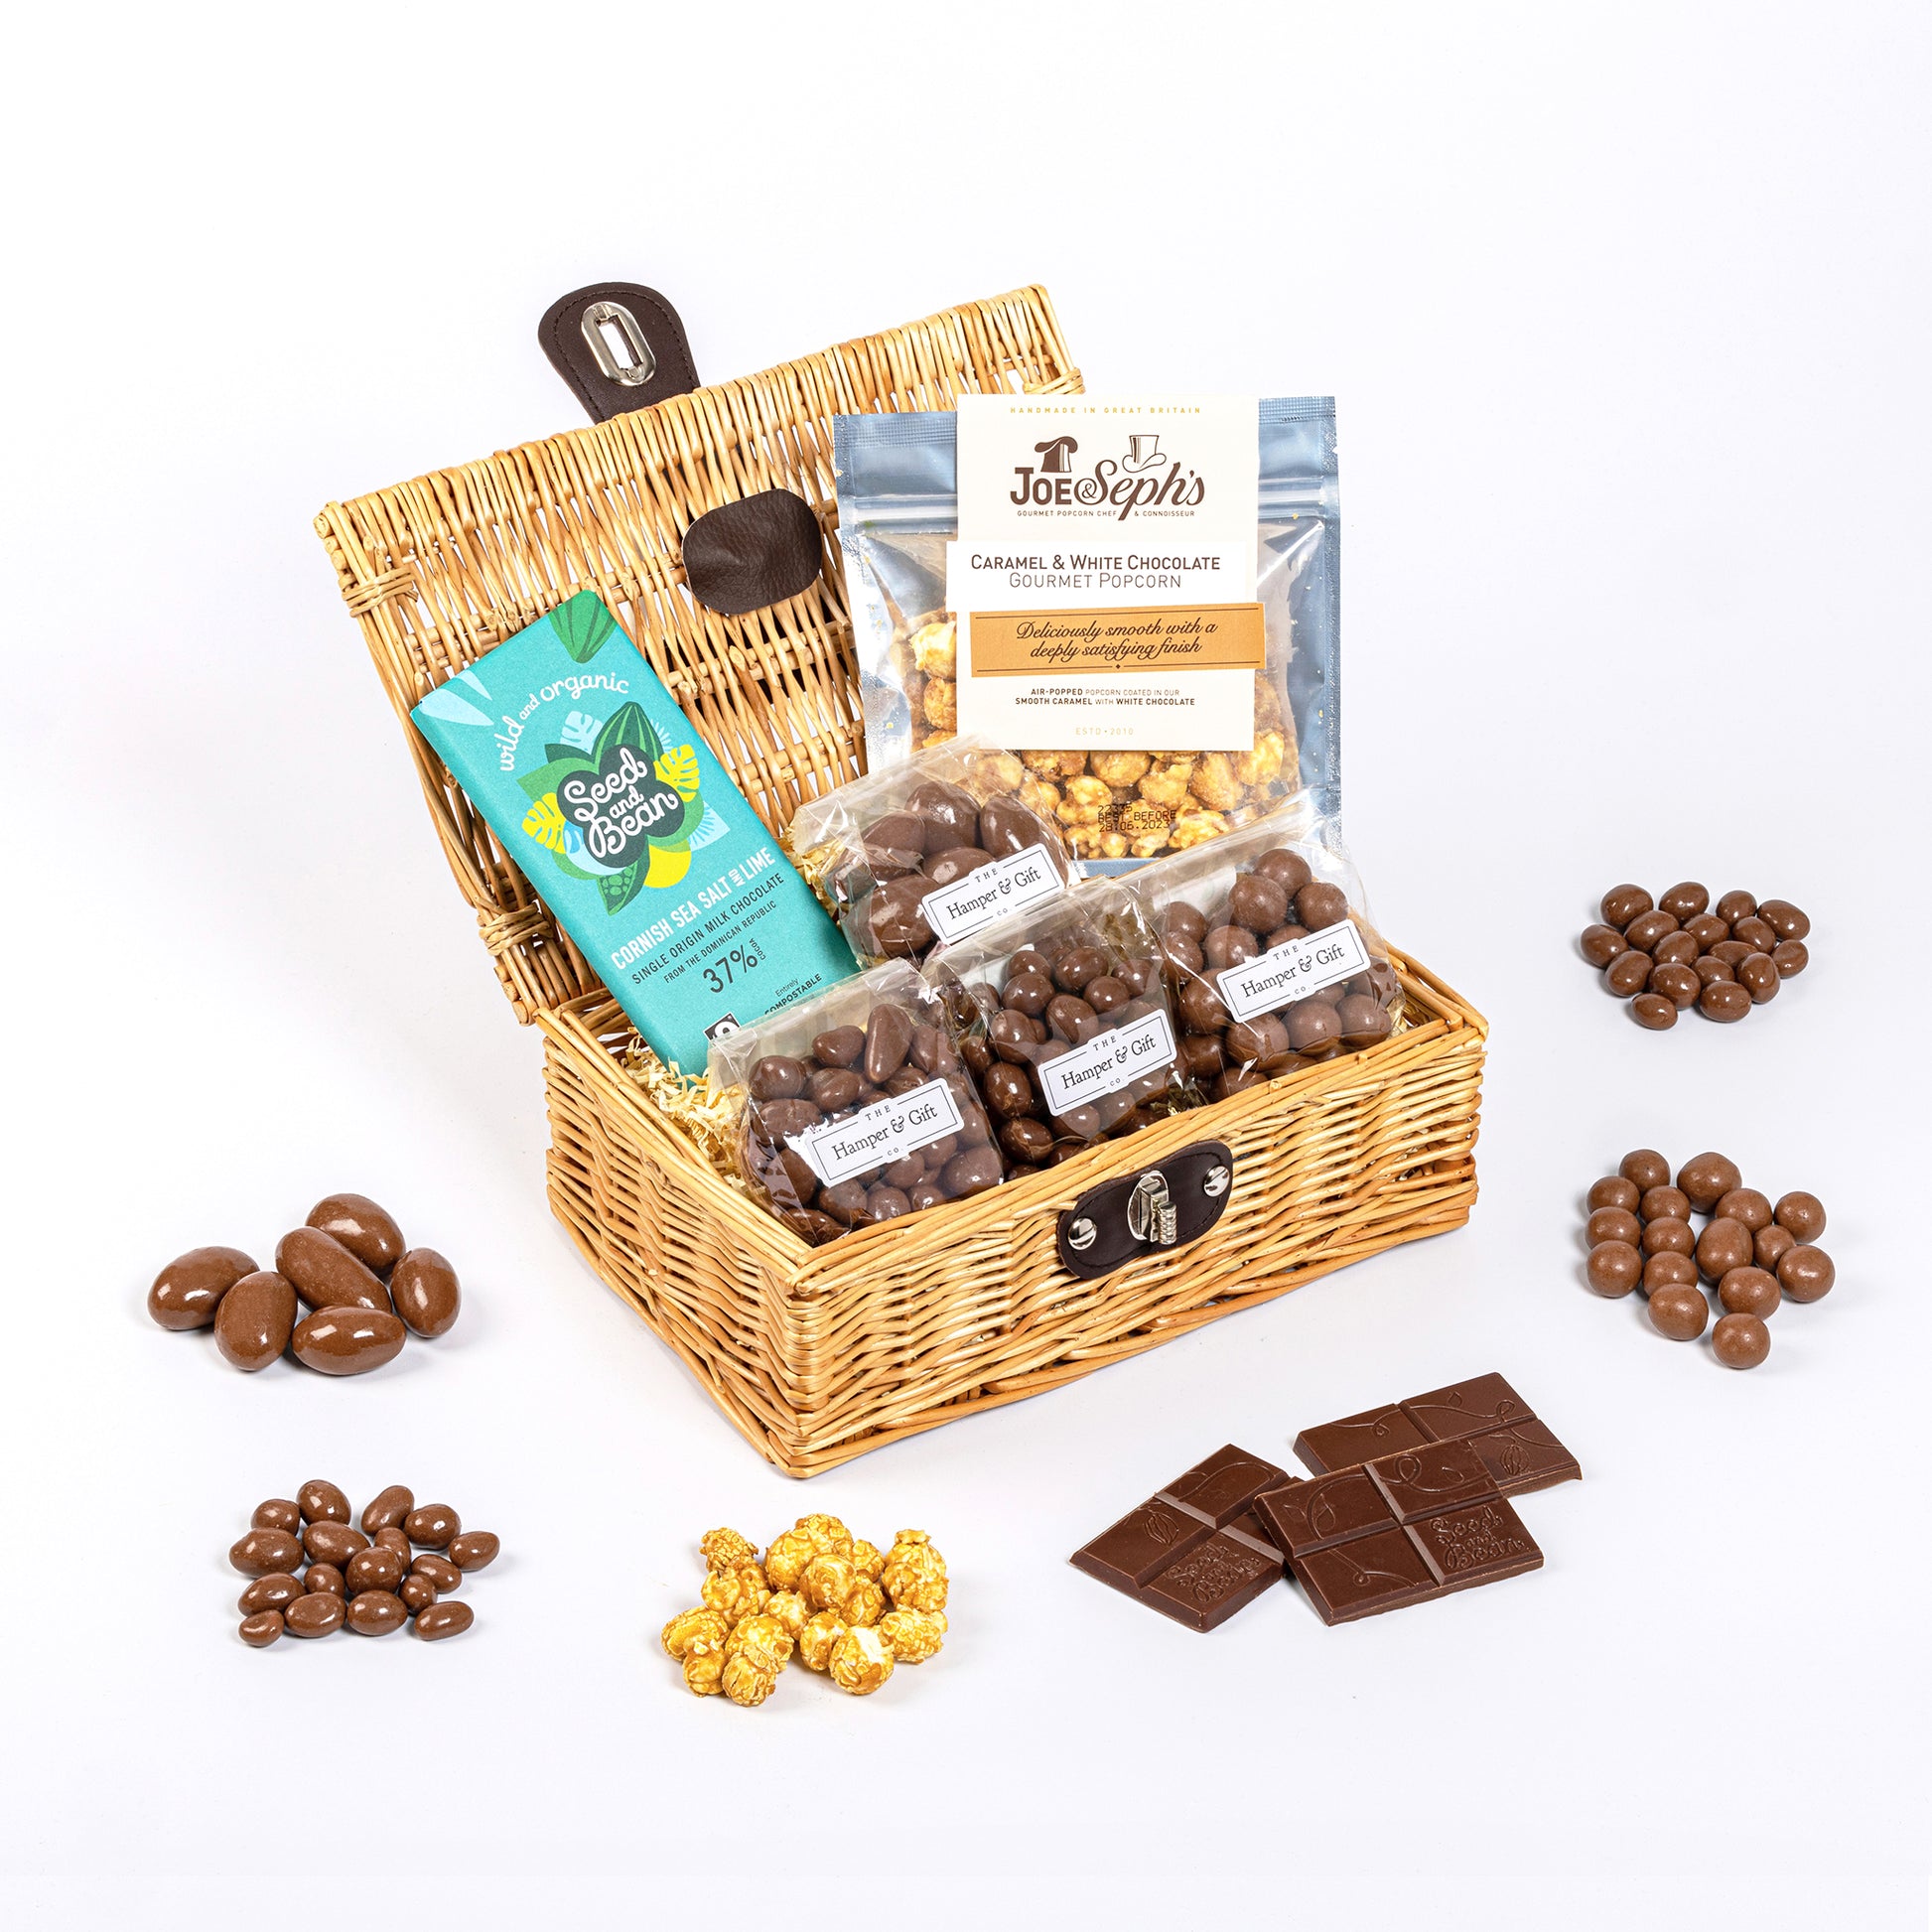 Little Chocolate Hamper filled with a variety of chocolate and gourmet popcorn